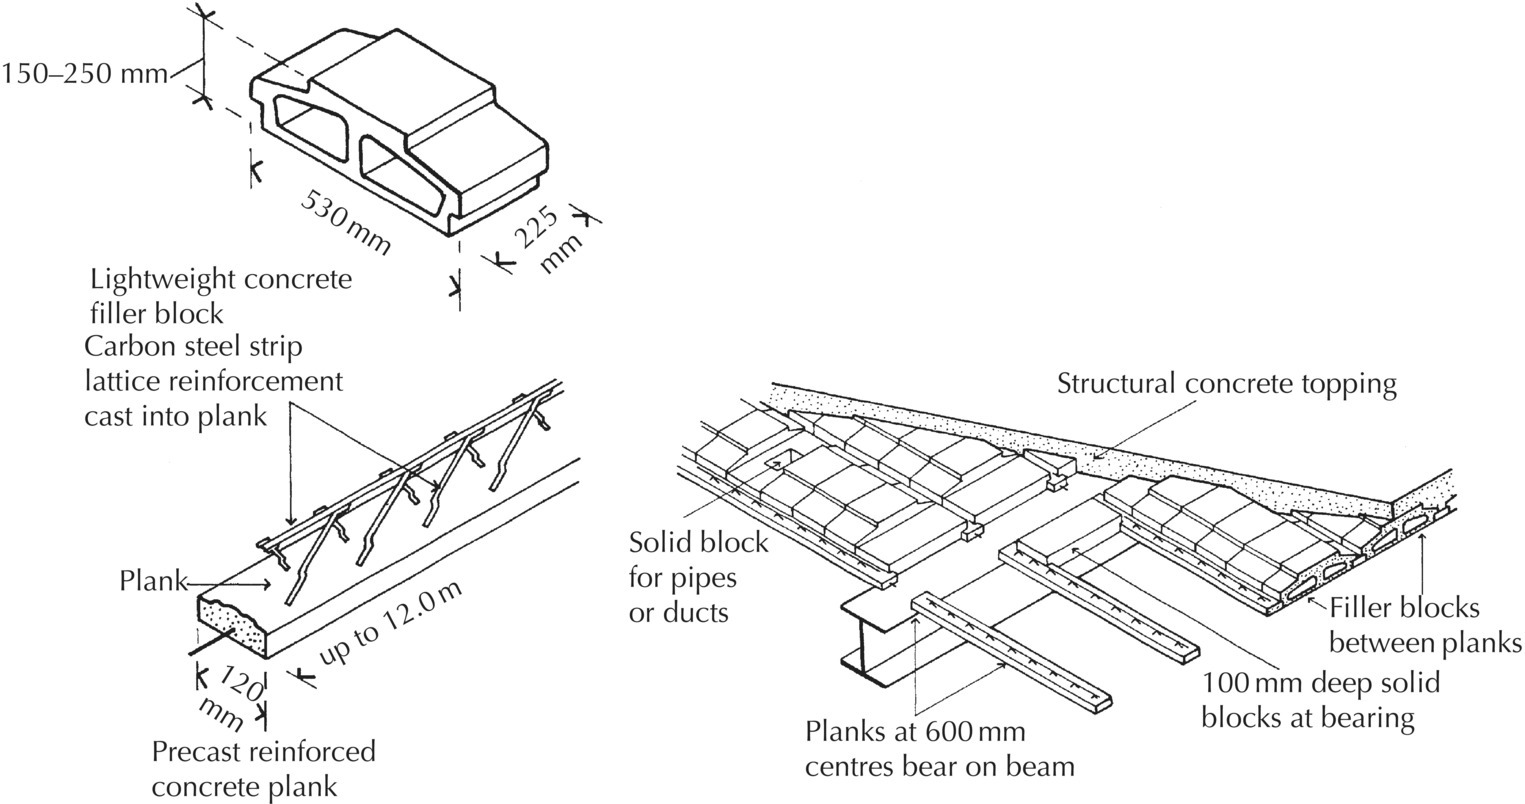 Diagram displaying precast beam and filter block floor with arrows to plank, solid block for pipes or ducts, structural concrete topping, filler blocks between planks, planks at 600mm centres bear on beam, etc.